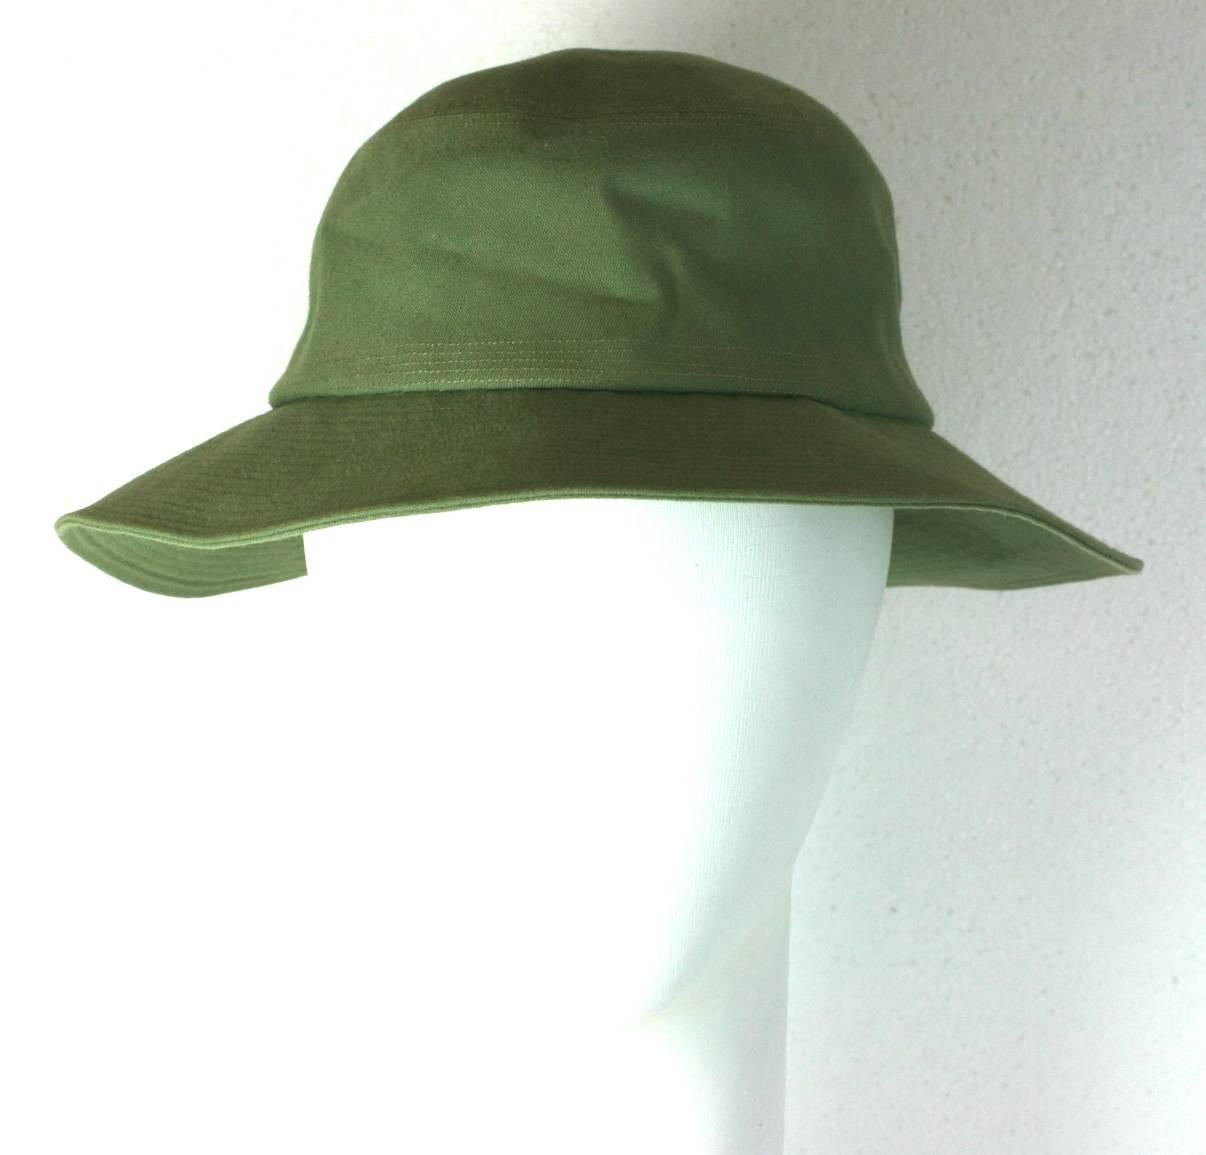  Yves Saint Laurent green cotton twill Fisherman's Hat with topstitched detailing throughout brim. A gallic interpretation where the brim is slightly wider in back as the original style would be. 
A. Elbaz for YSL. 2000's France. Excellent